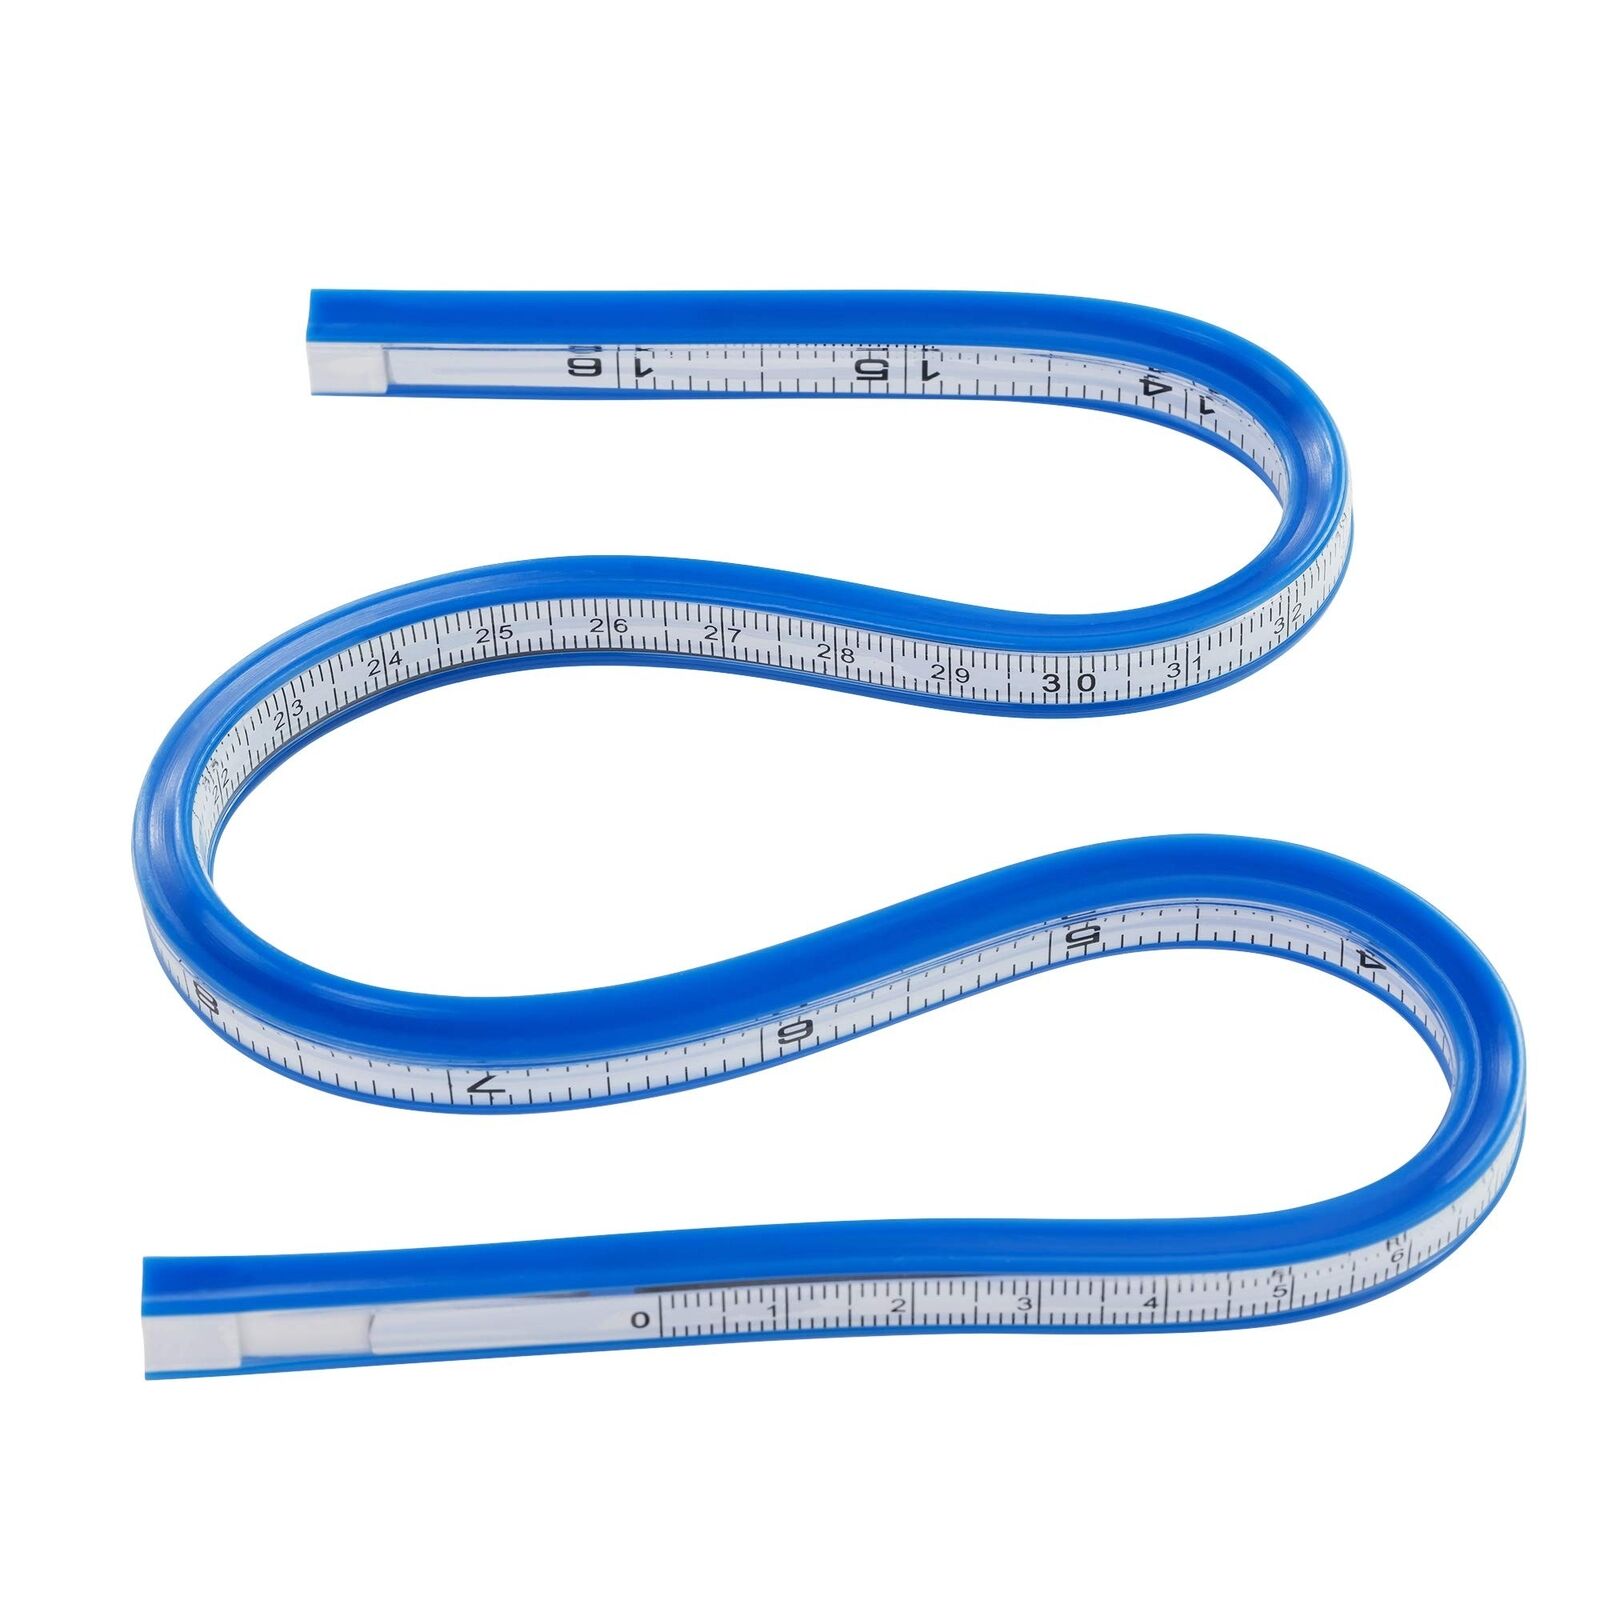 Pacific Arc Flexible Curve Graduated 16 Inch Ruler with Inking Edge, for Draw...